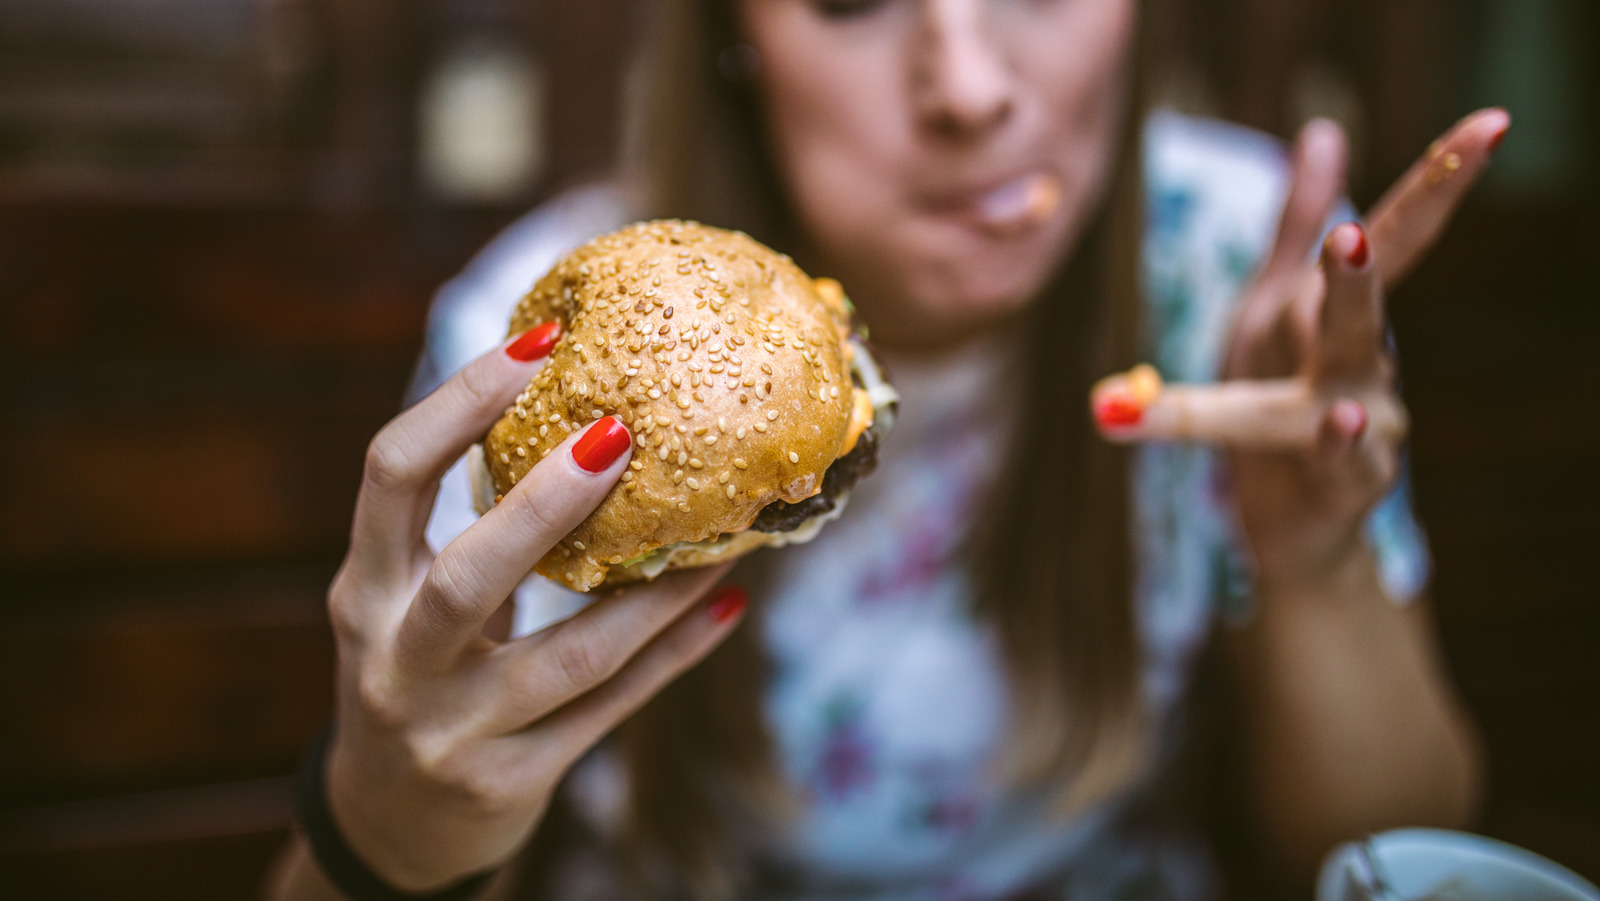 This Fast Food Burger Fact Will Have You Questioning Reality